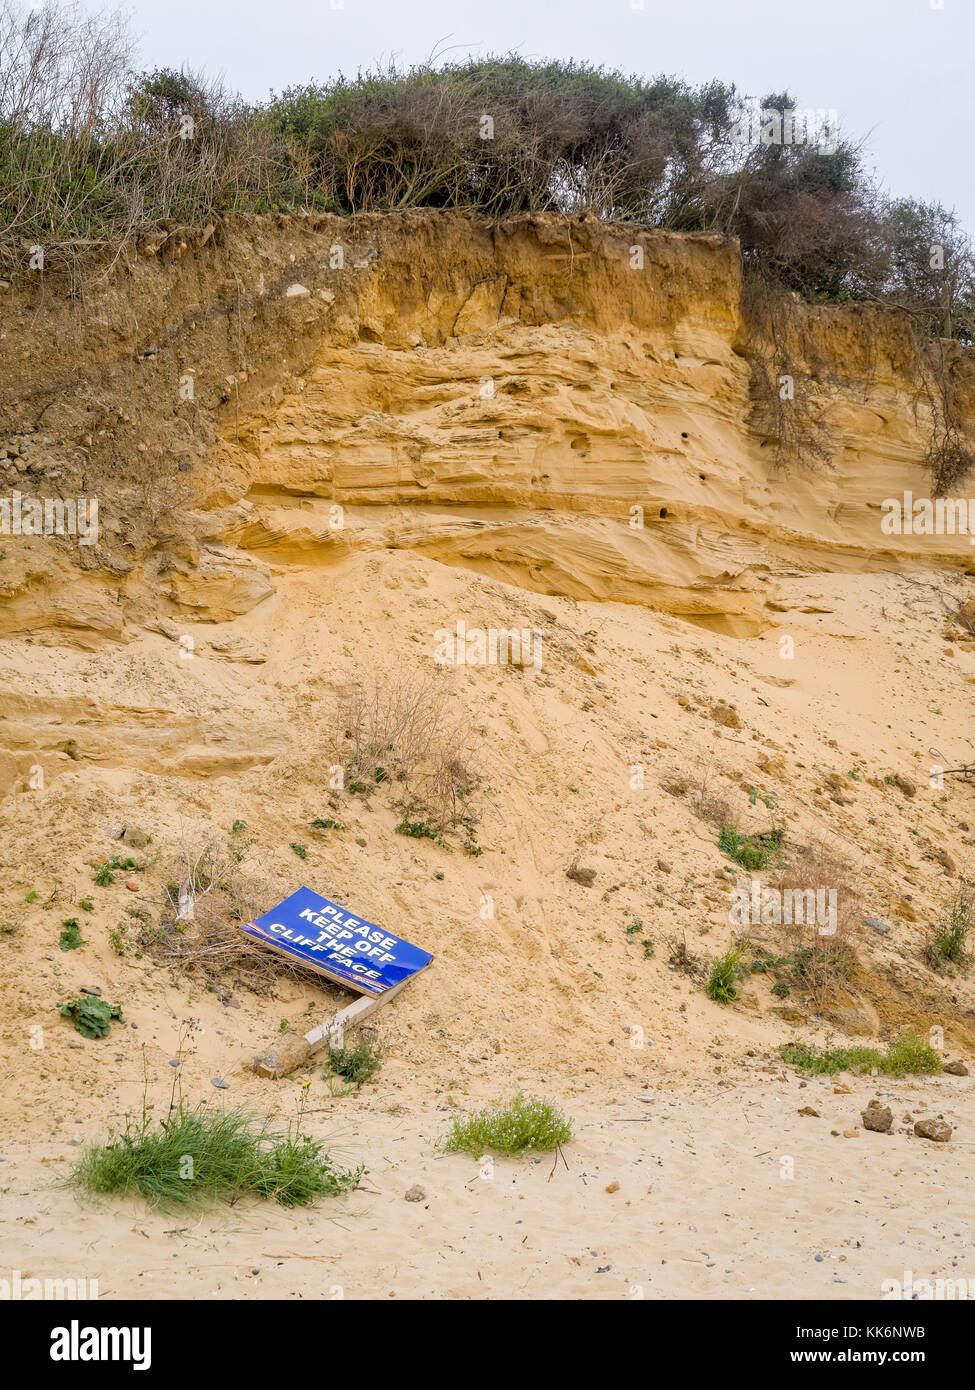 Coastal erosion along the beach at Pakefield, This is caused by Wave and Tidal action removing the sediments. Stock Photo